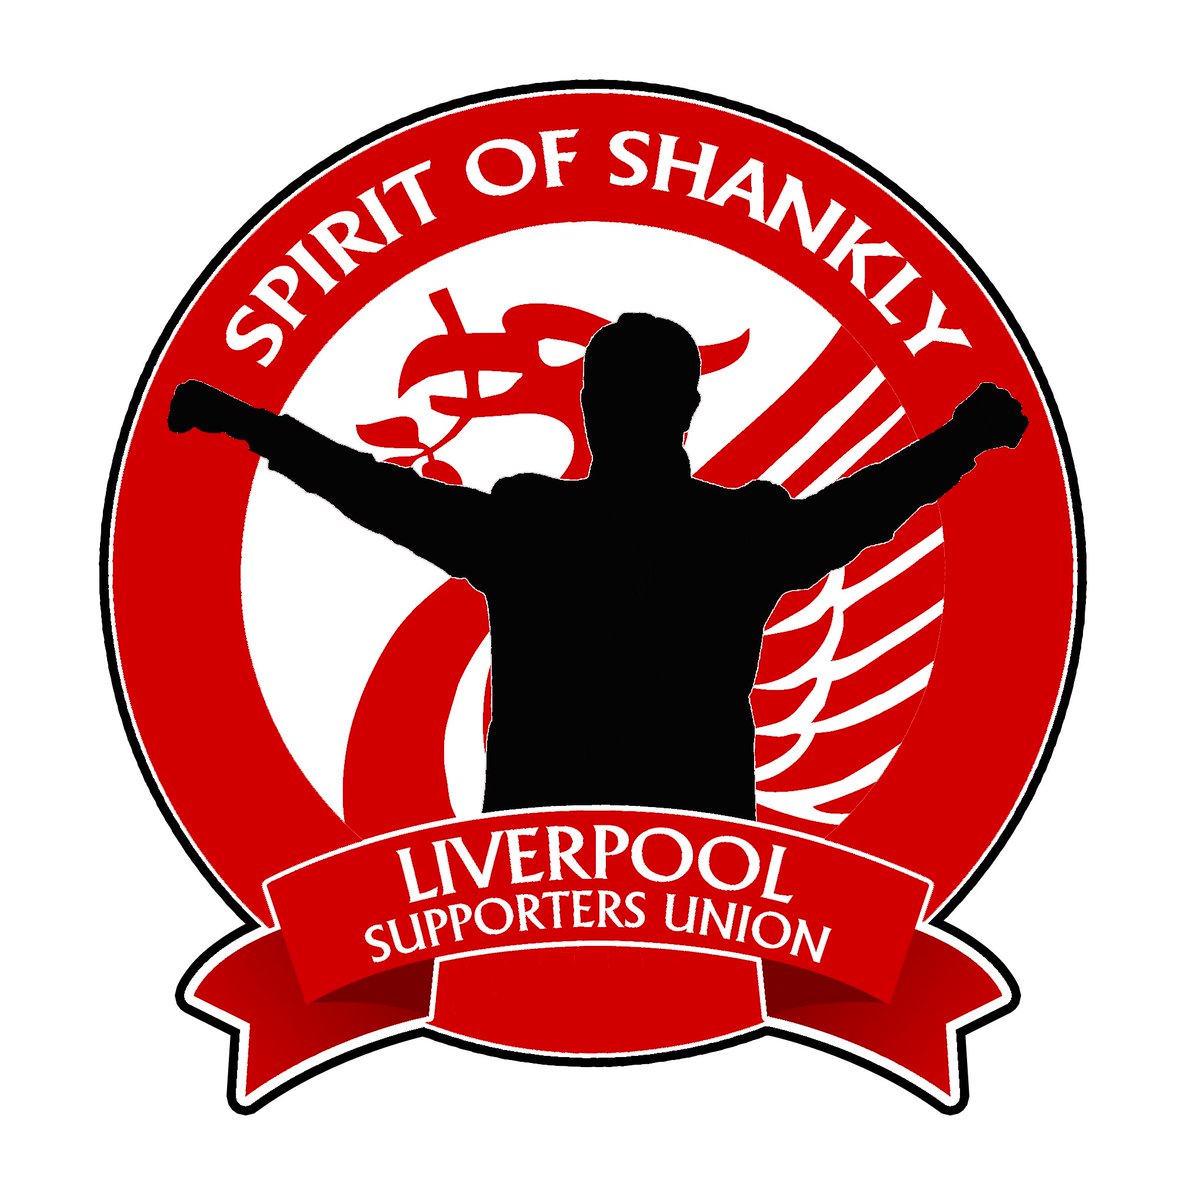 Why we oppose the rising cost of tickets, a joint statement with @SpionKop1906 spiritofshankly.com/ticket-increas…